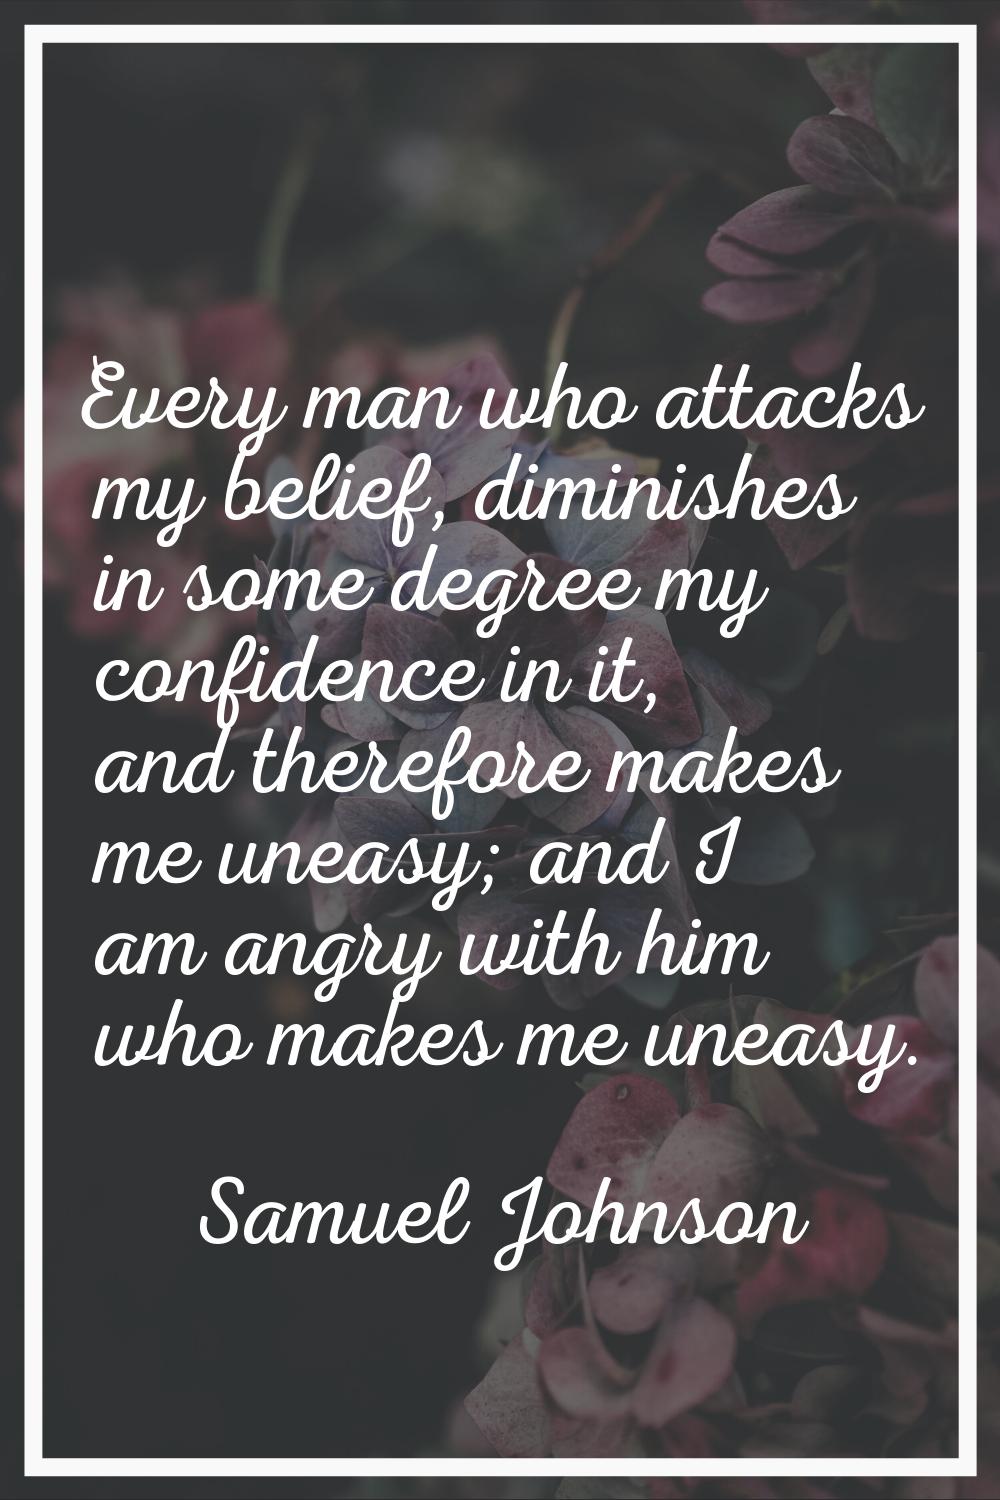 Every man who attacks my belief, diminishes in some degree my confidence in it, and therefore makes